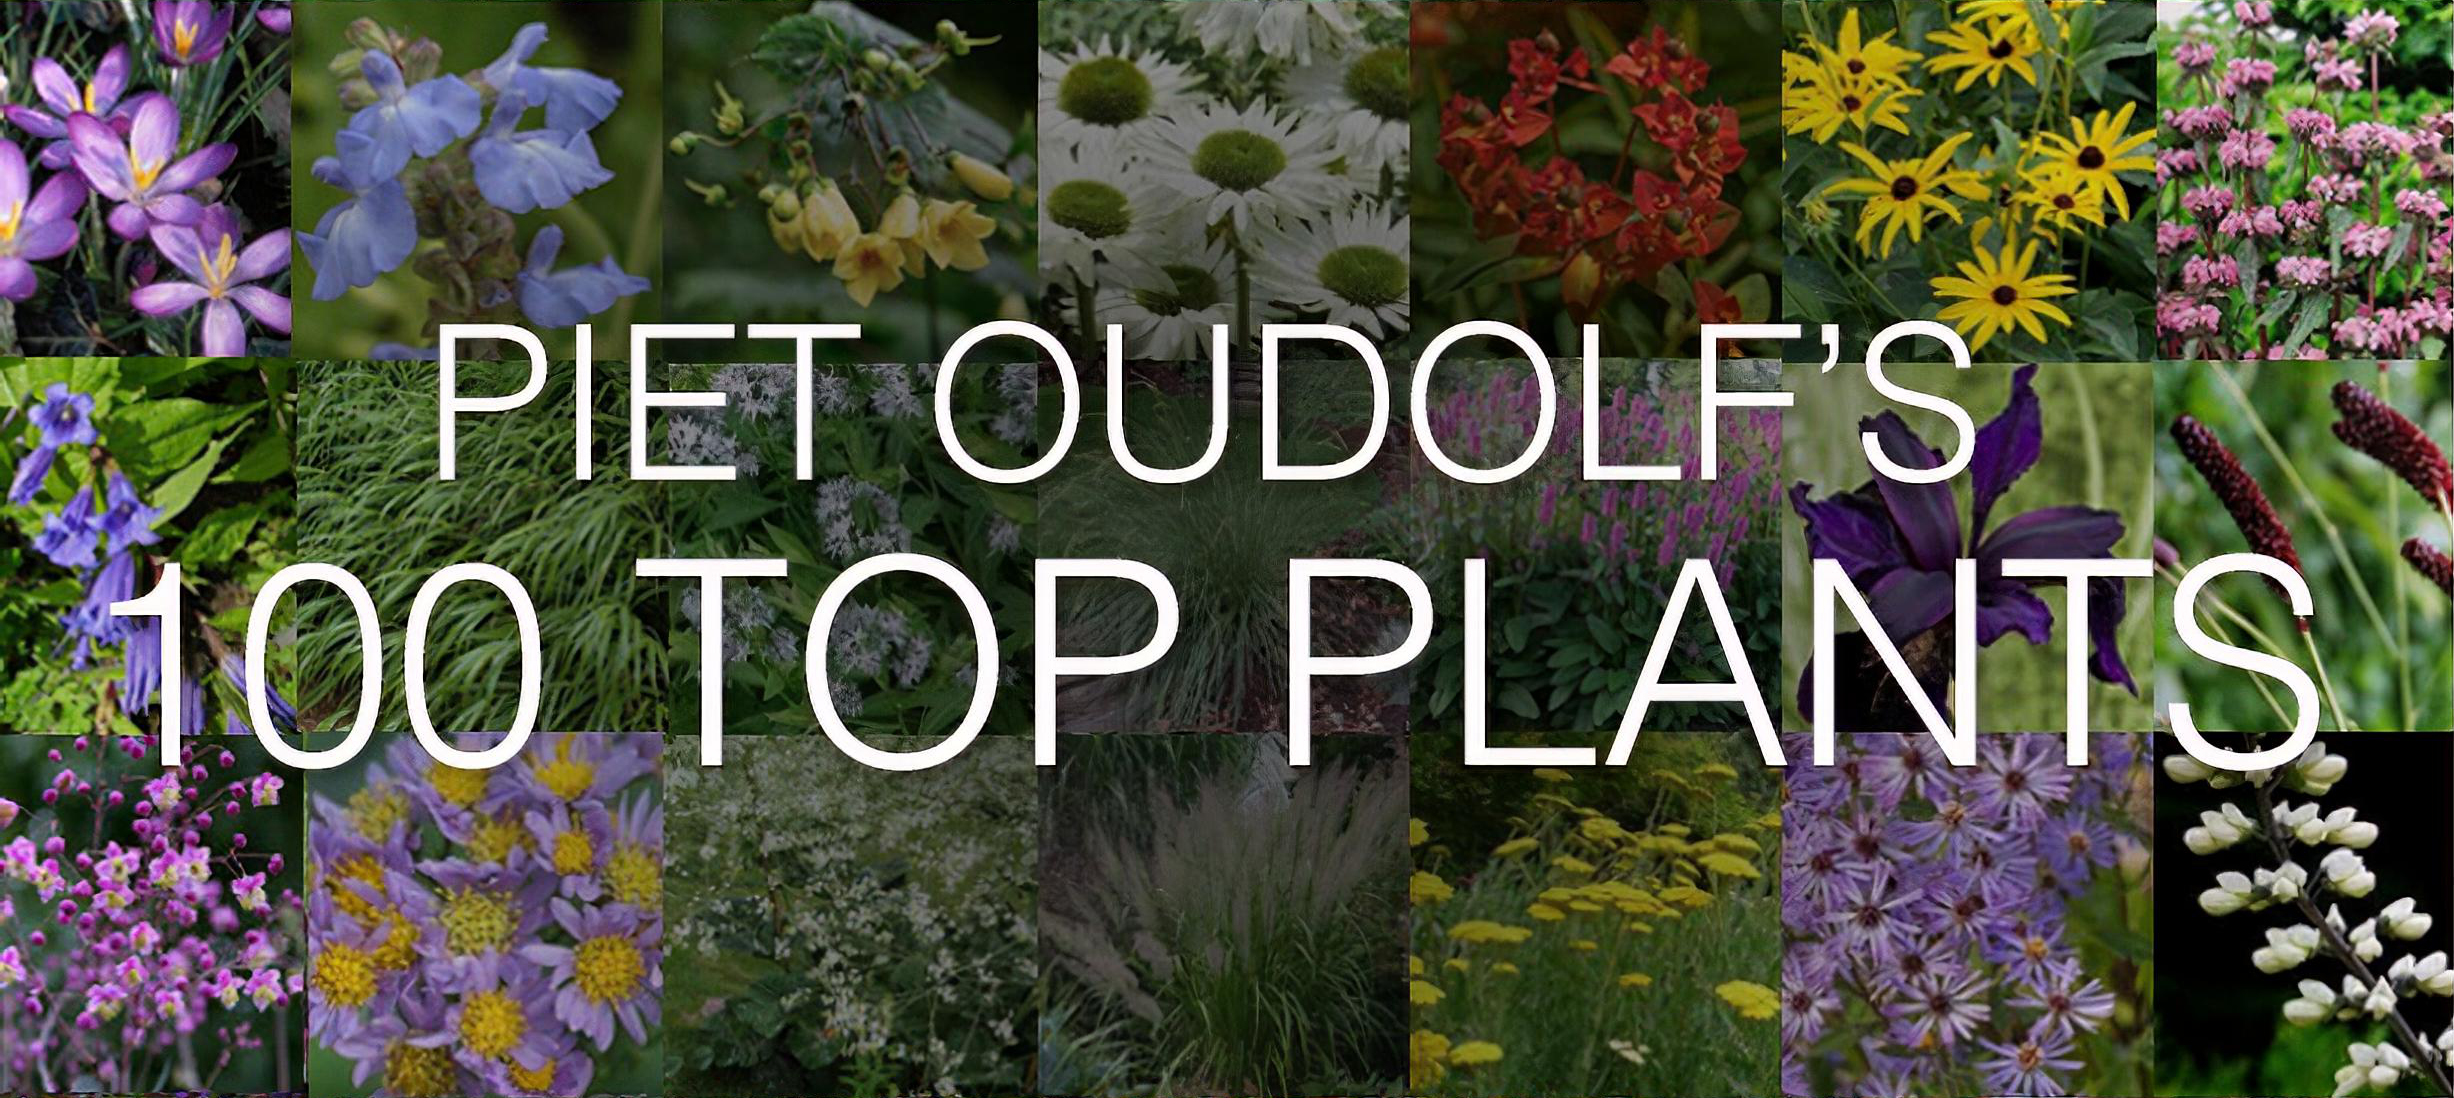 Piet Oudolf is a world-famous garden designer, nurseryman and writer. In 2013 he singled out the 100 plants he won't do without and we have them all listed for you here in Shoot.